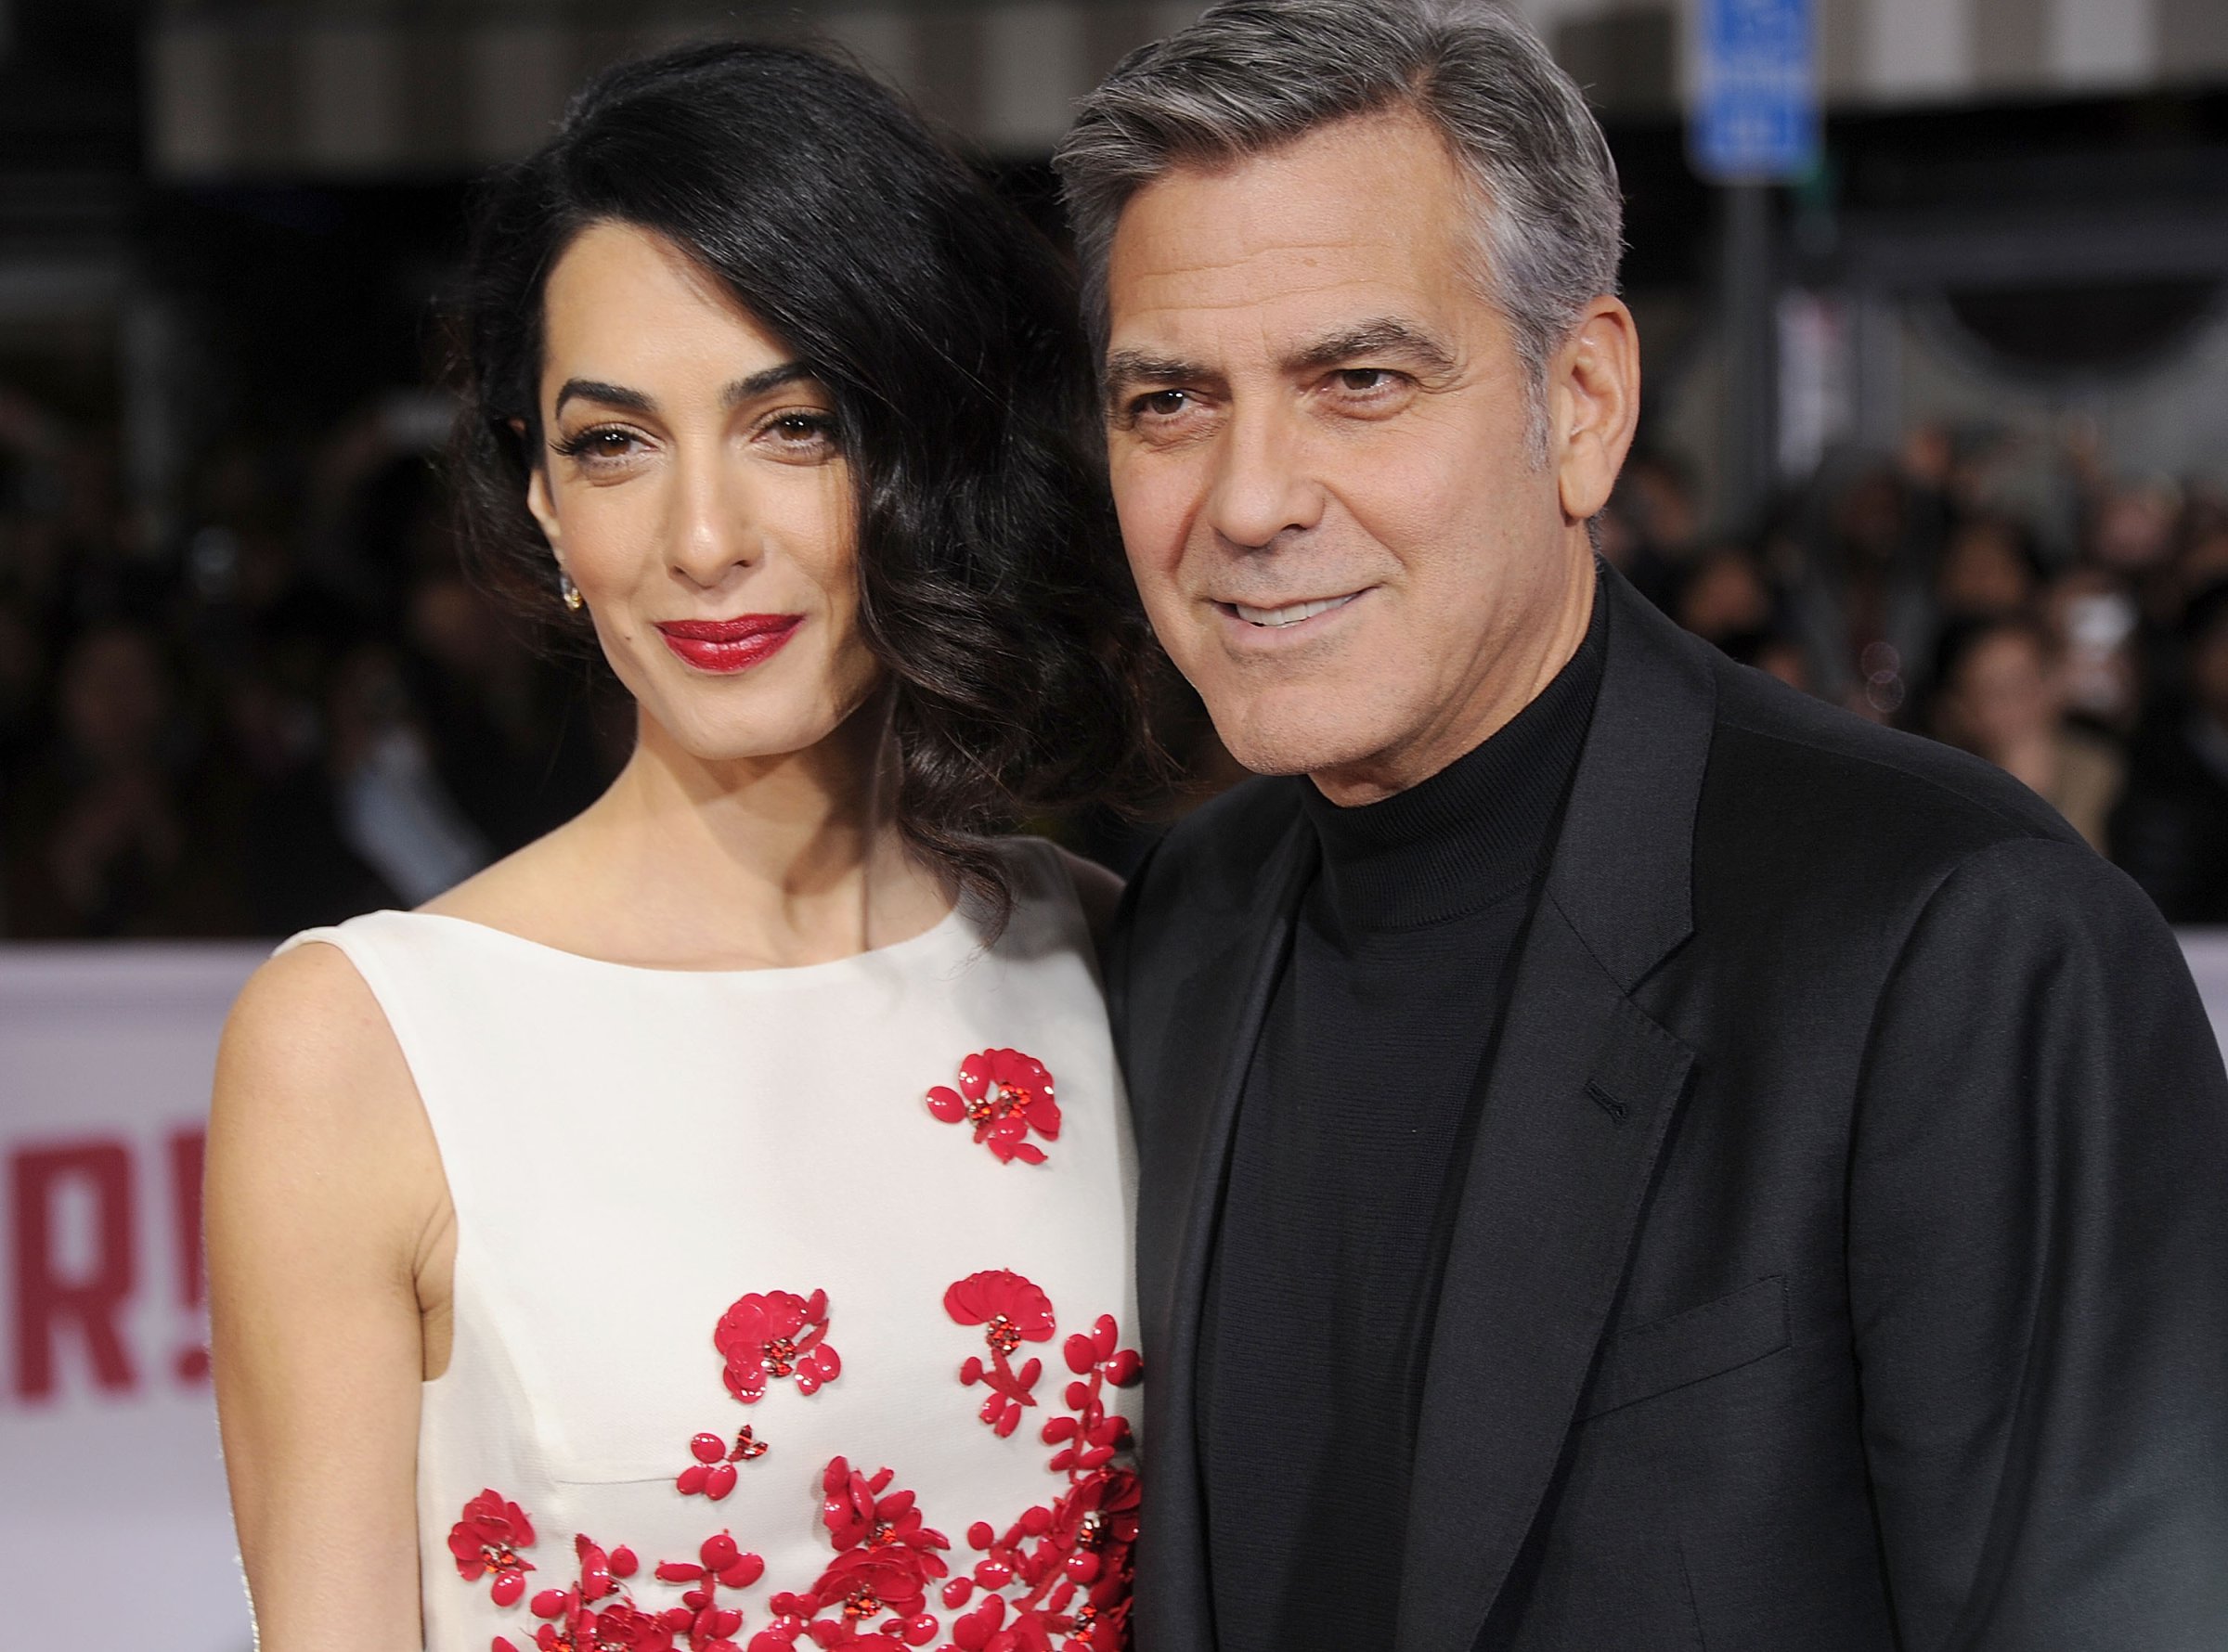 George Clooney arrives at the premiere of Universal Pictures' "Hail, Caesar!" at Regency Village Theatre on February 1, 2016 in Westwood, California.